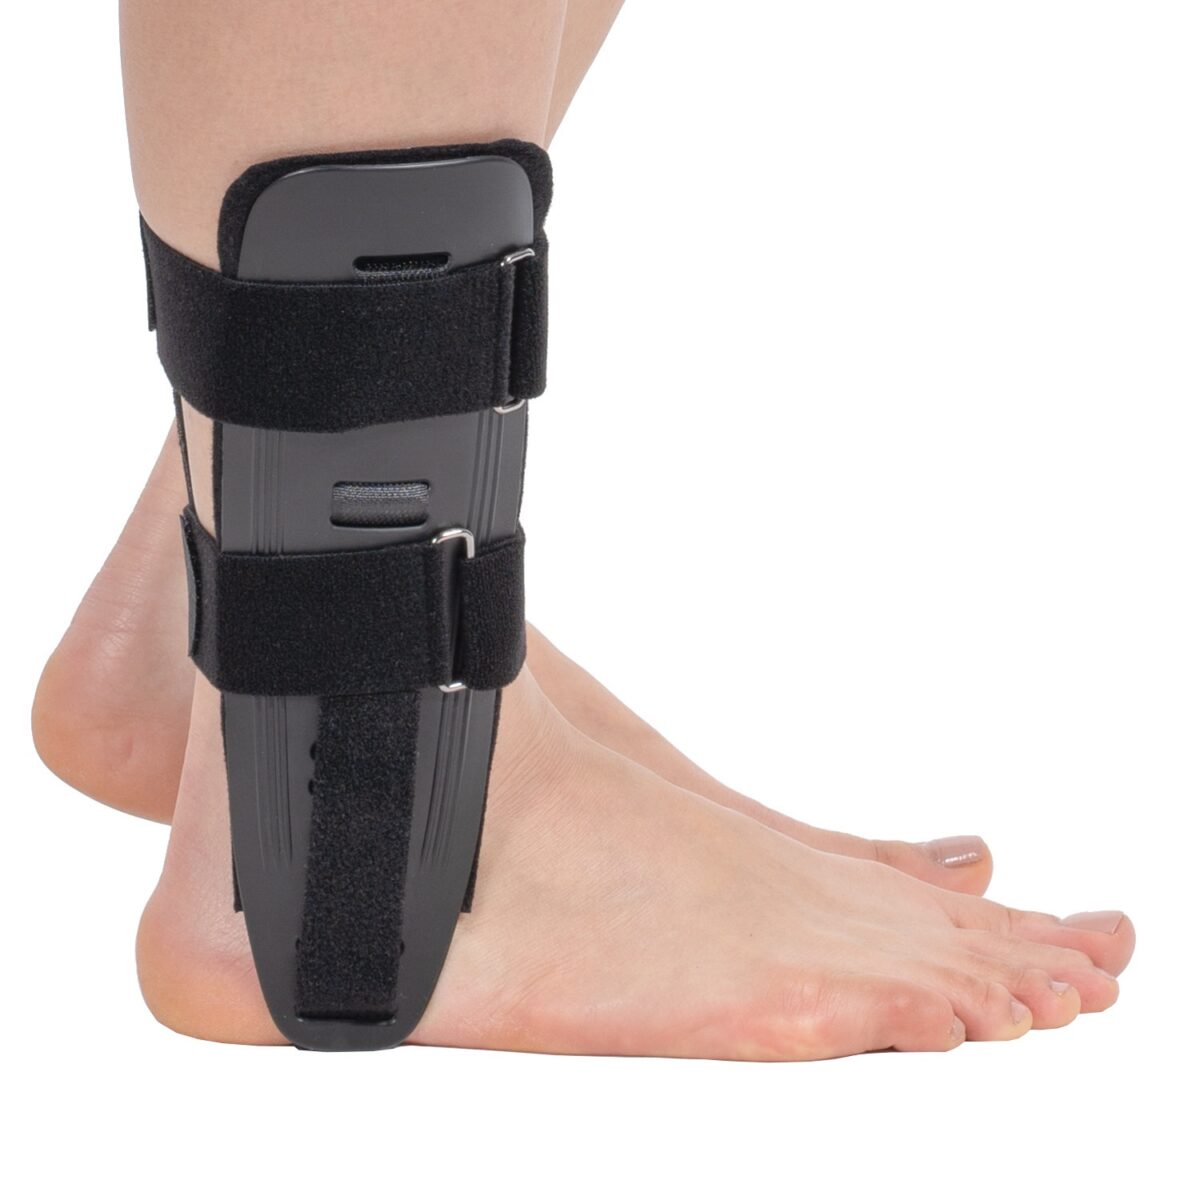 wingmed orthopedic equipments W616 ankle brace with gel pad 33 1 1